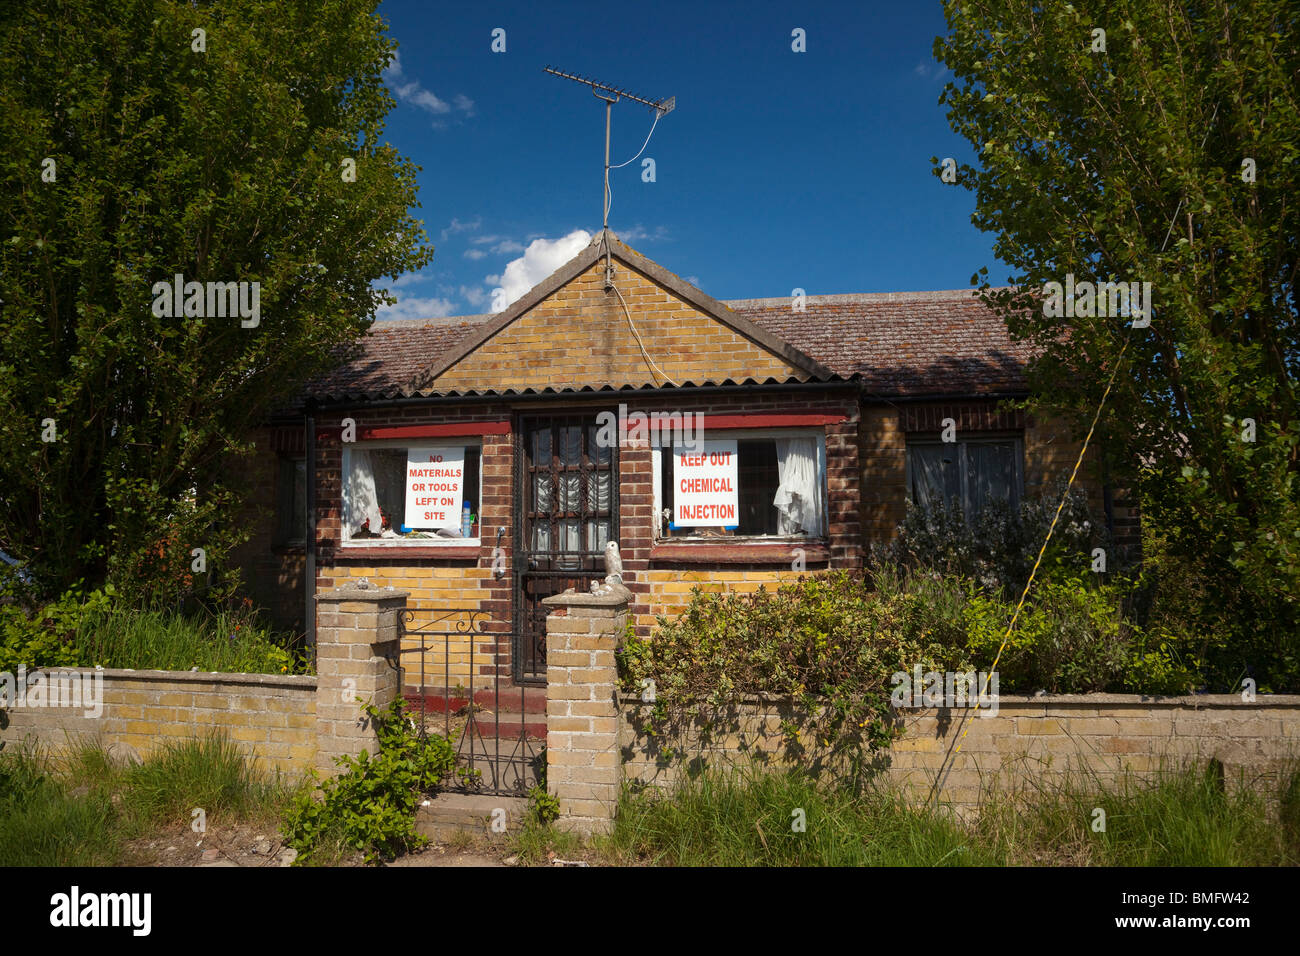 A small bungalow in Jaywick, Essex, UK which is being chemically treated Stock Photo